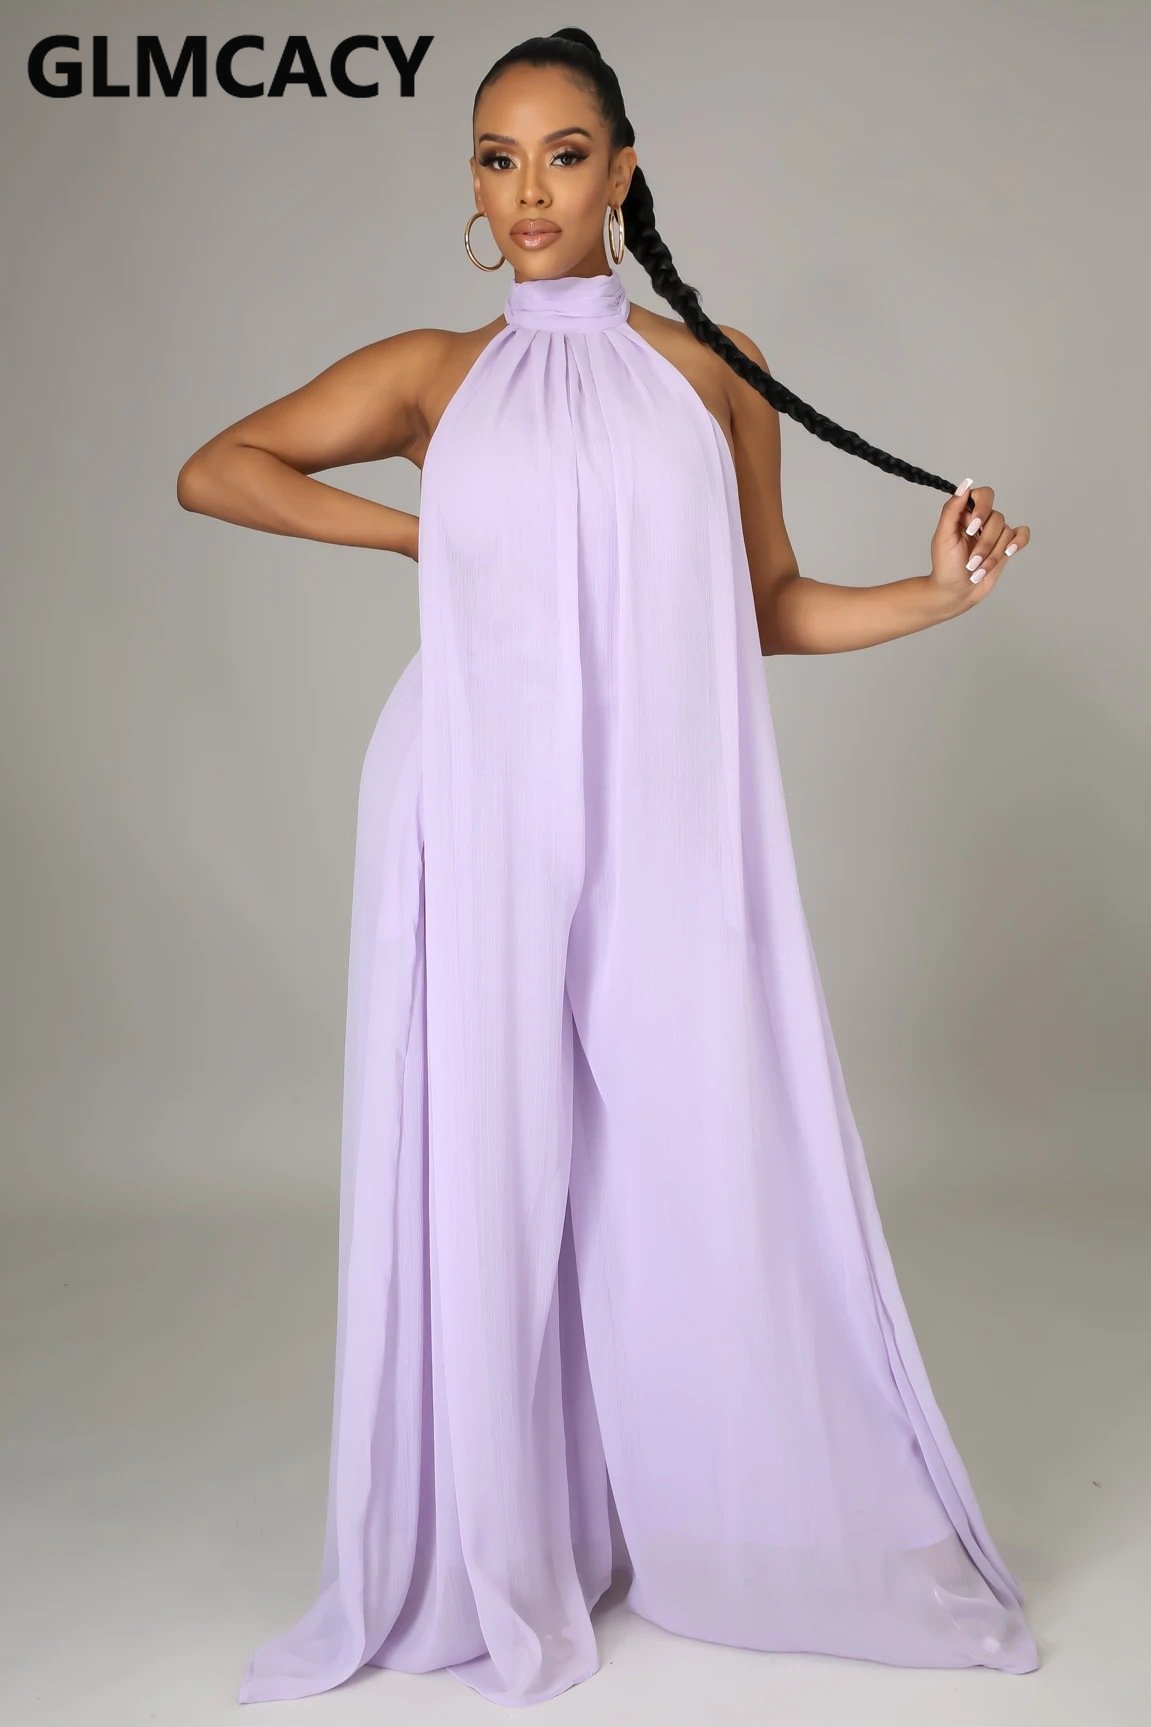 Women Chiffon Halter Backless Jumpsuits Loose Style Long Overalls Elegant Party Club Jumpsuit